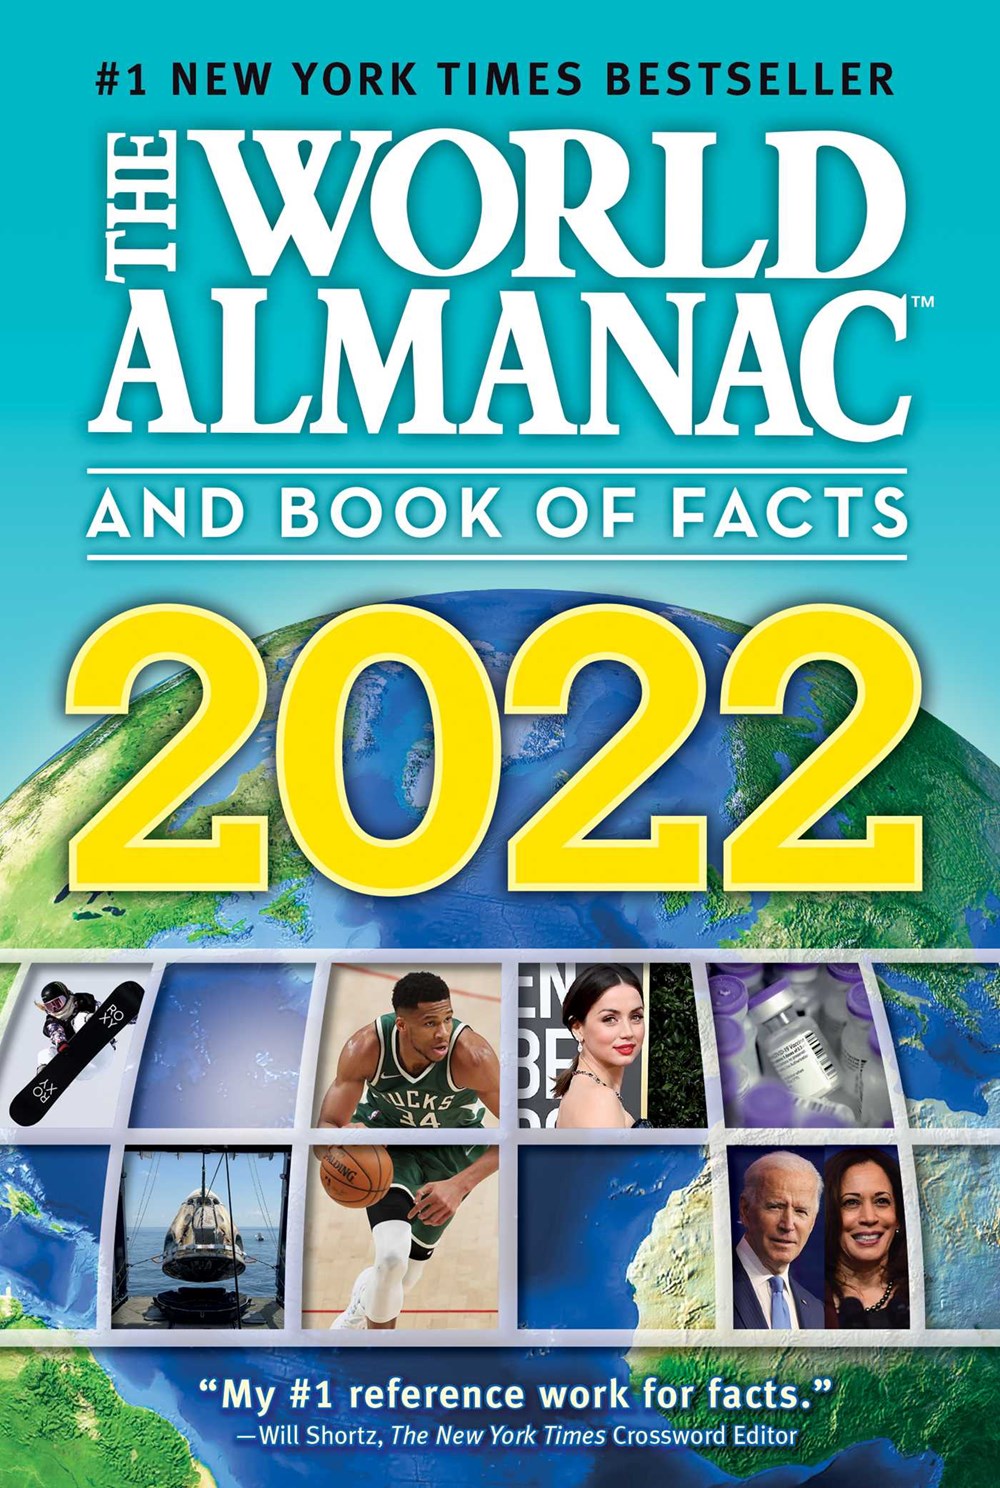 The World Almanac and Book of Facts 2022 by Sarah Janssen Firestorm Books